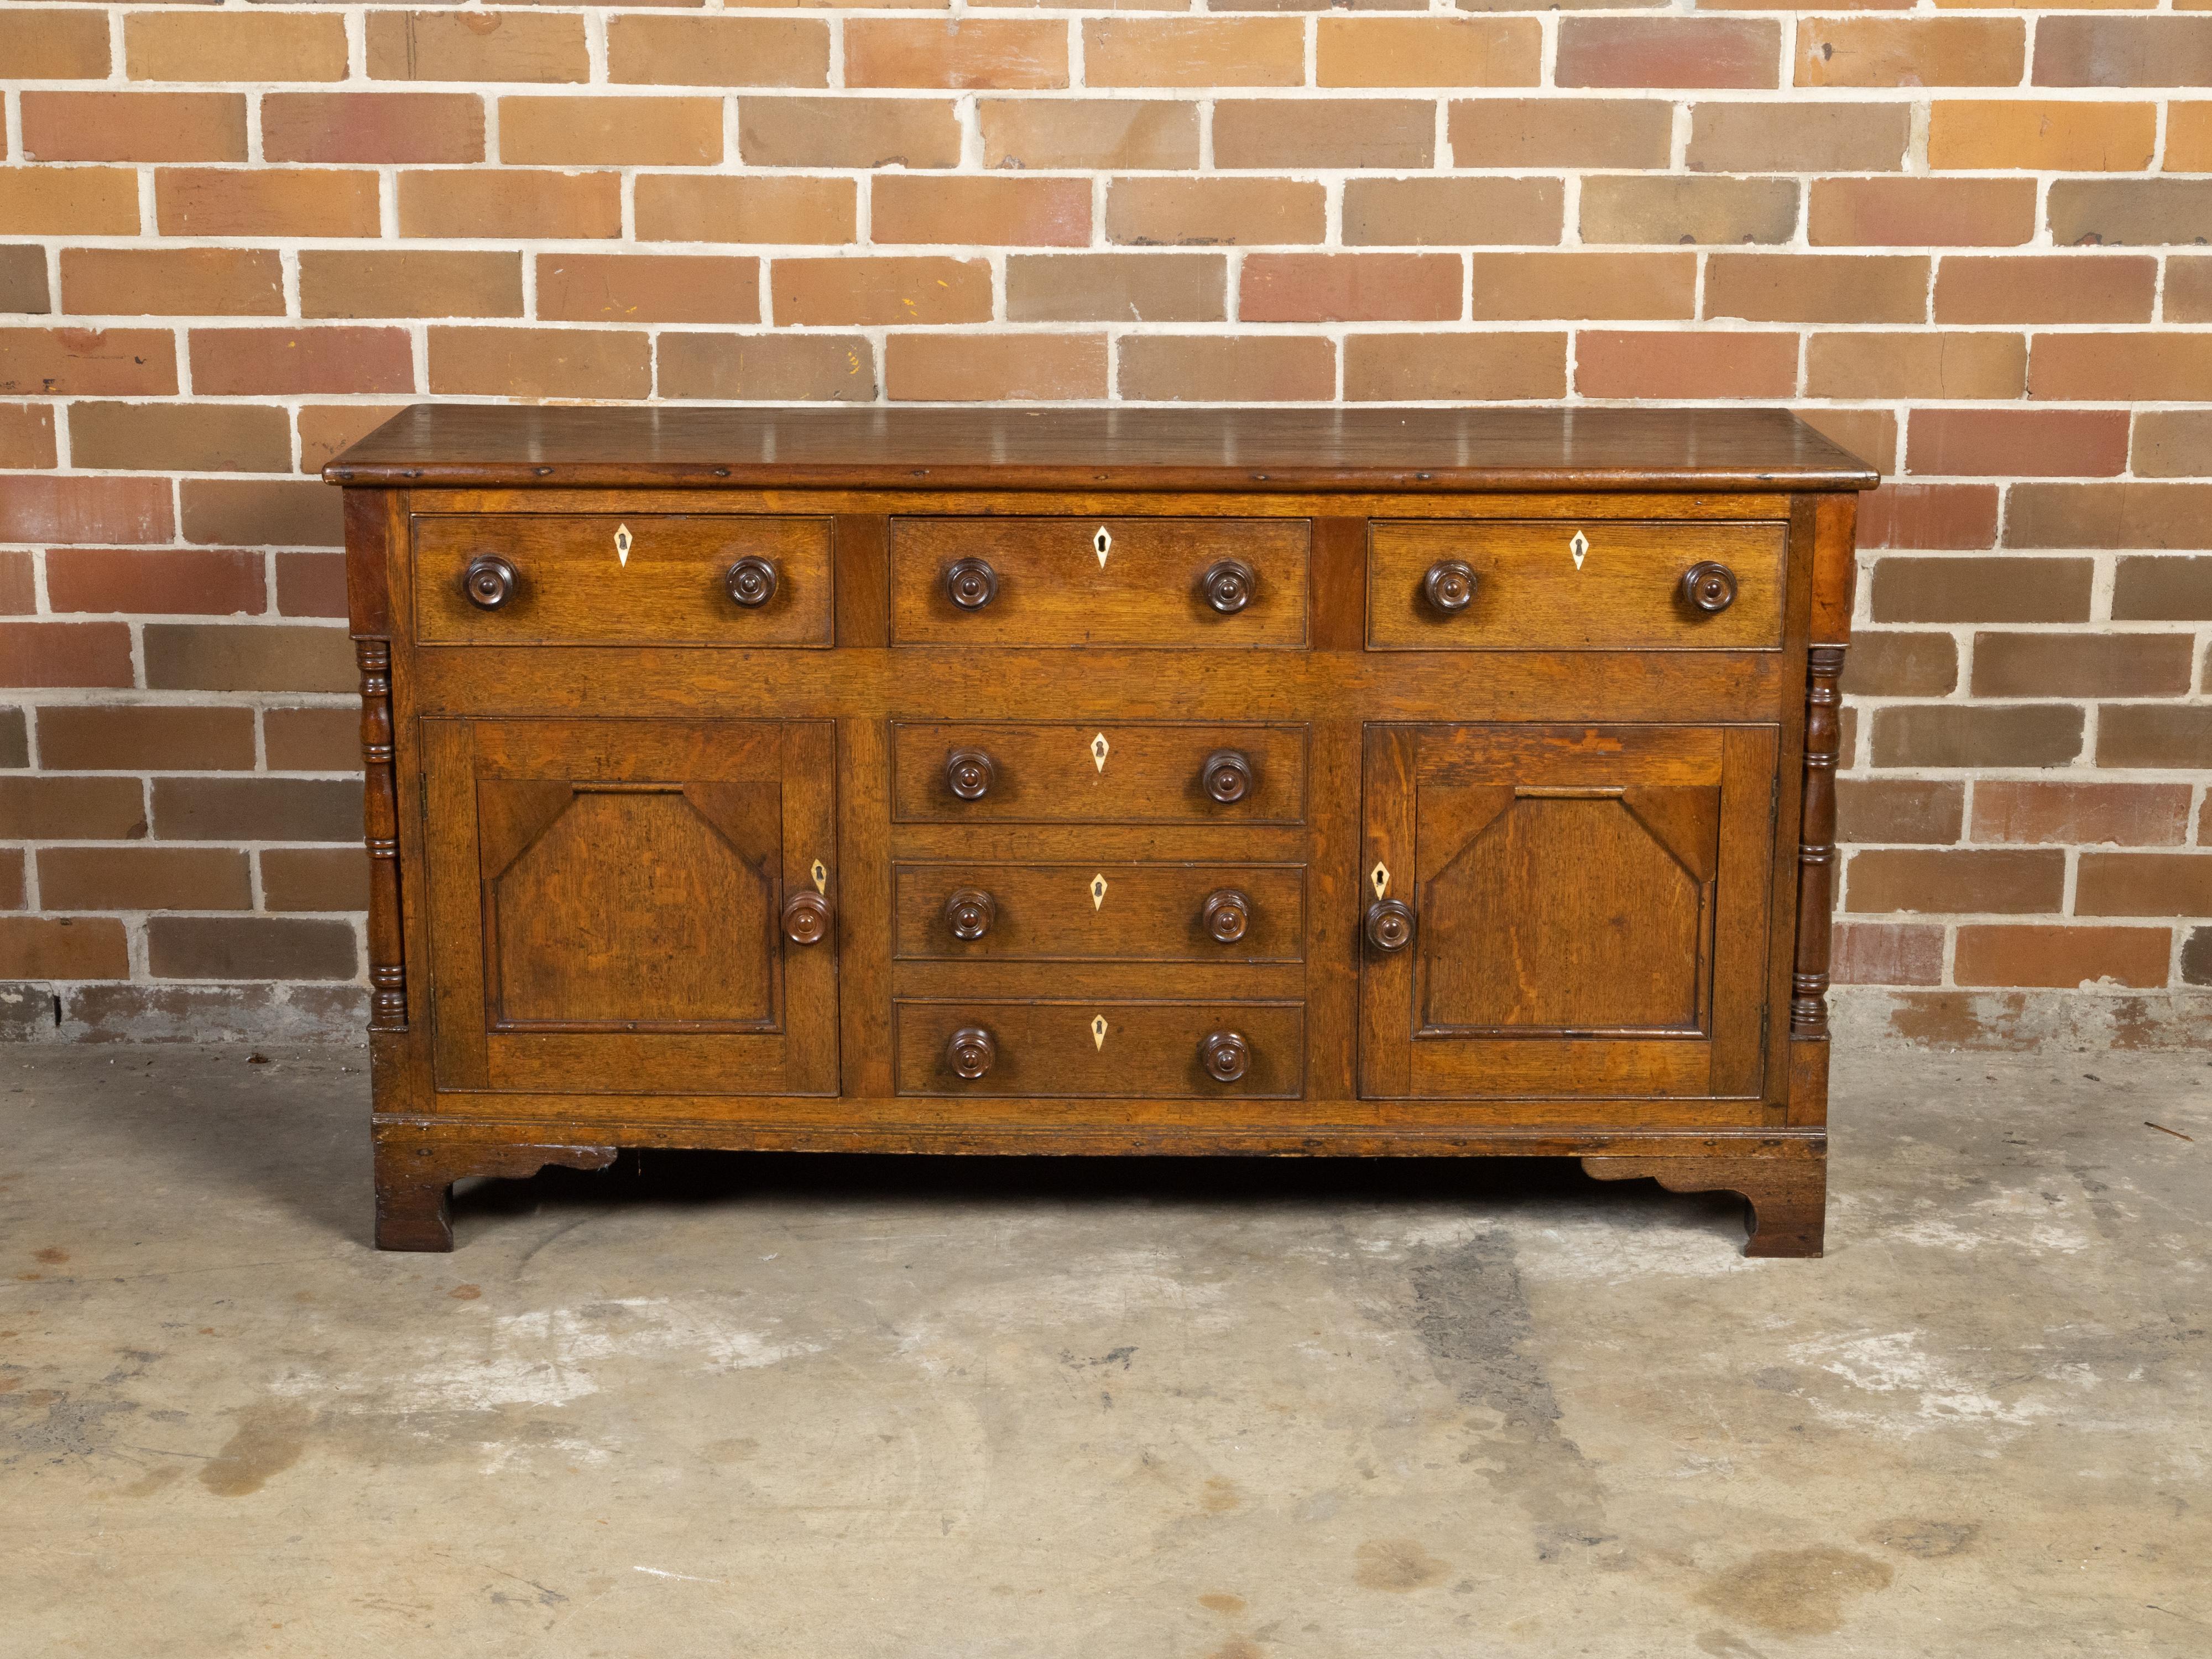 An English oak dresser base from the 19th century with six drawers, two doors, bone inlaid escutcheons and thin columns. Created in England during the 19th century, this oak dresser base features a rectangular planked top sitting above a perfectly